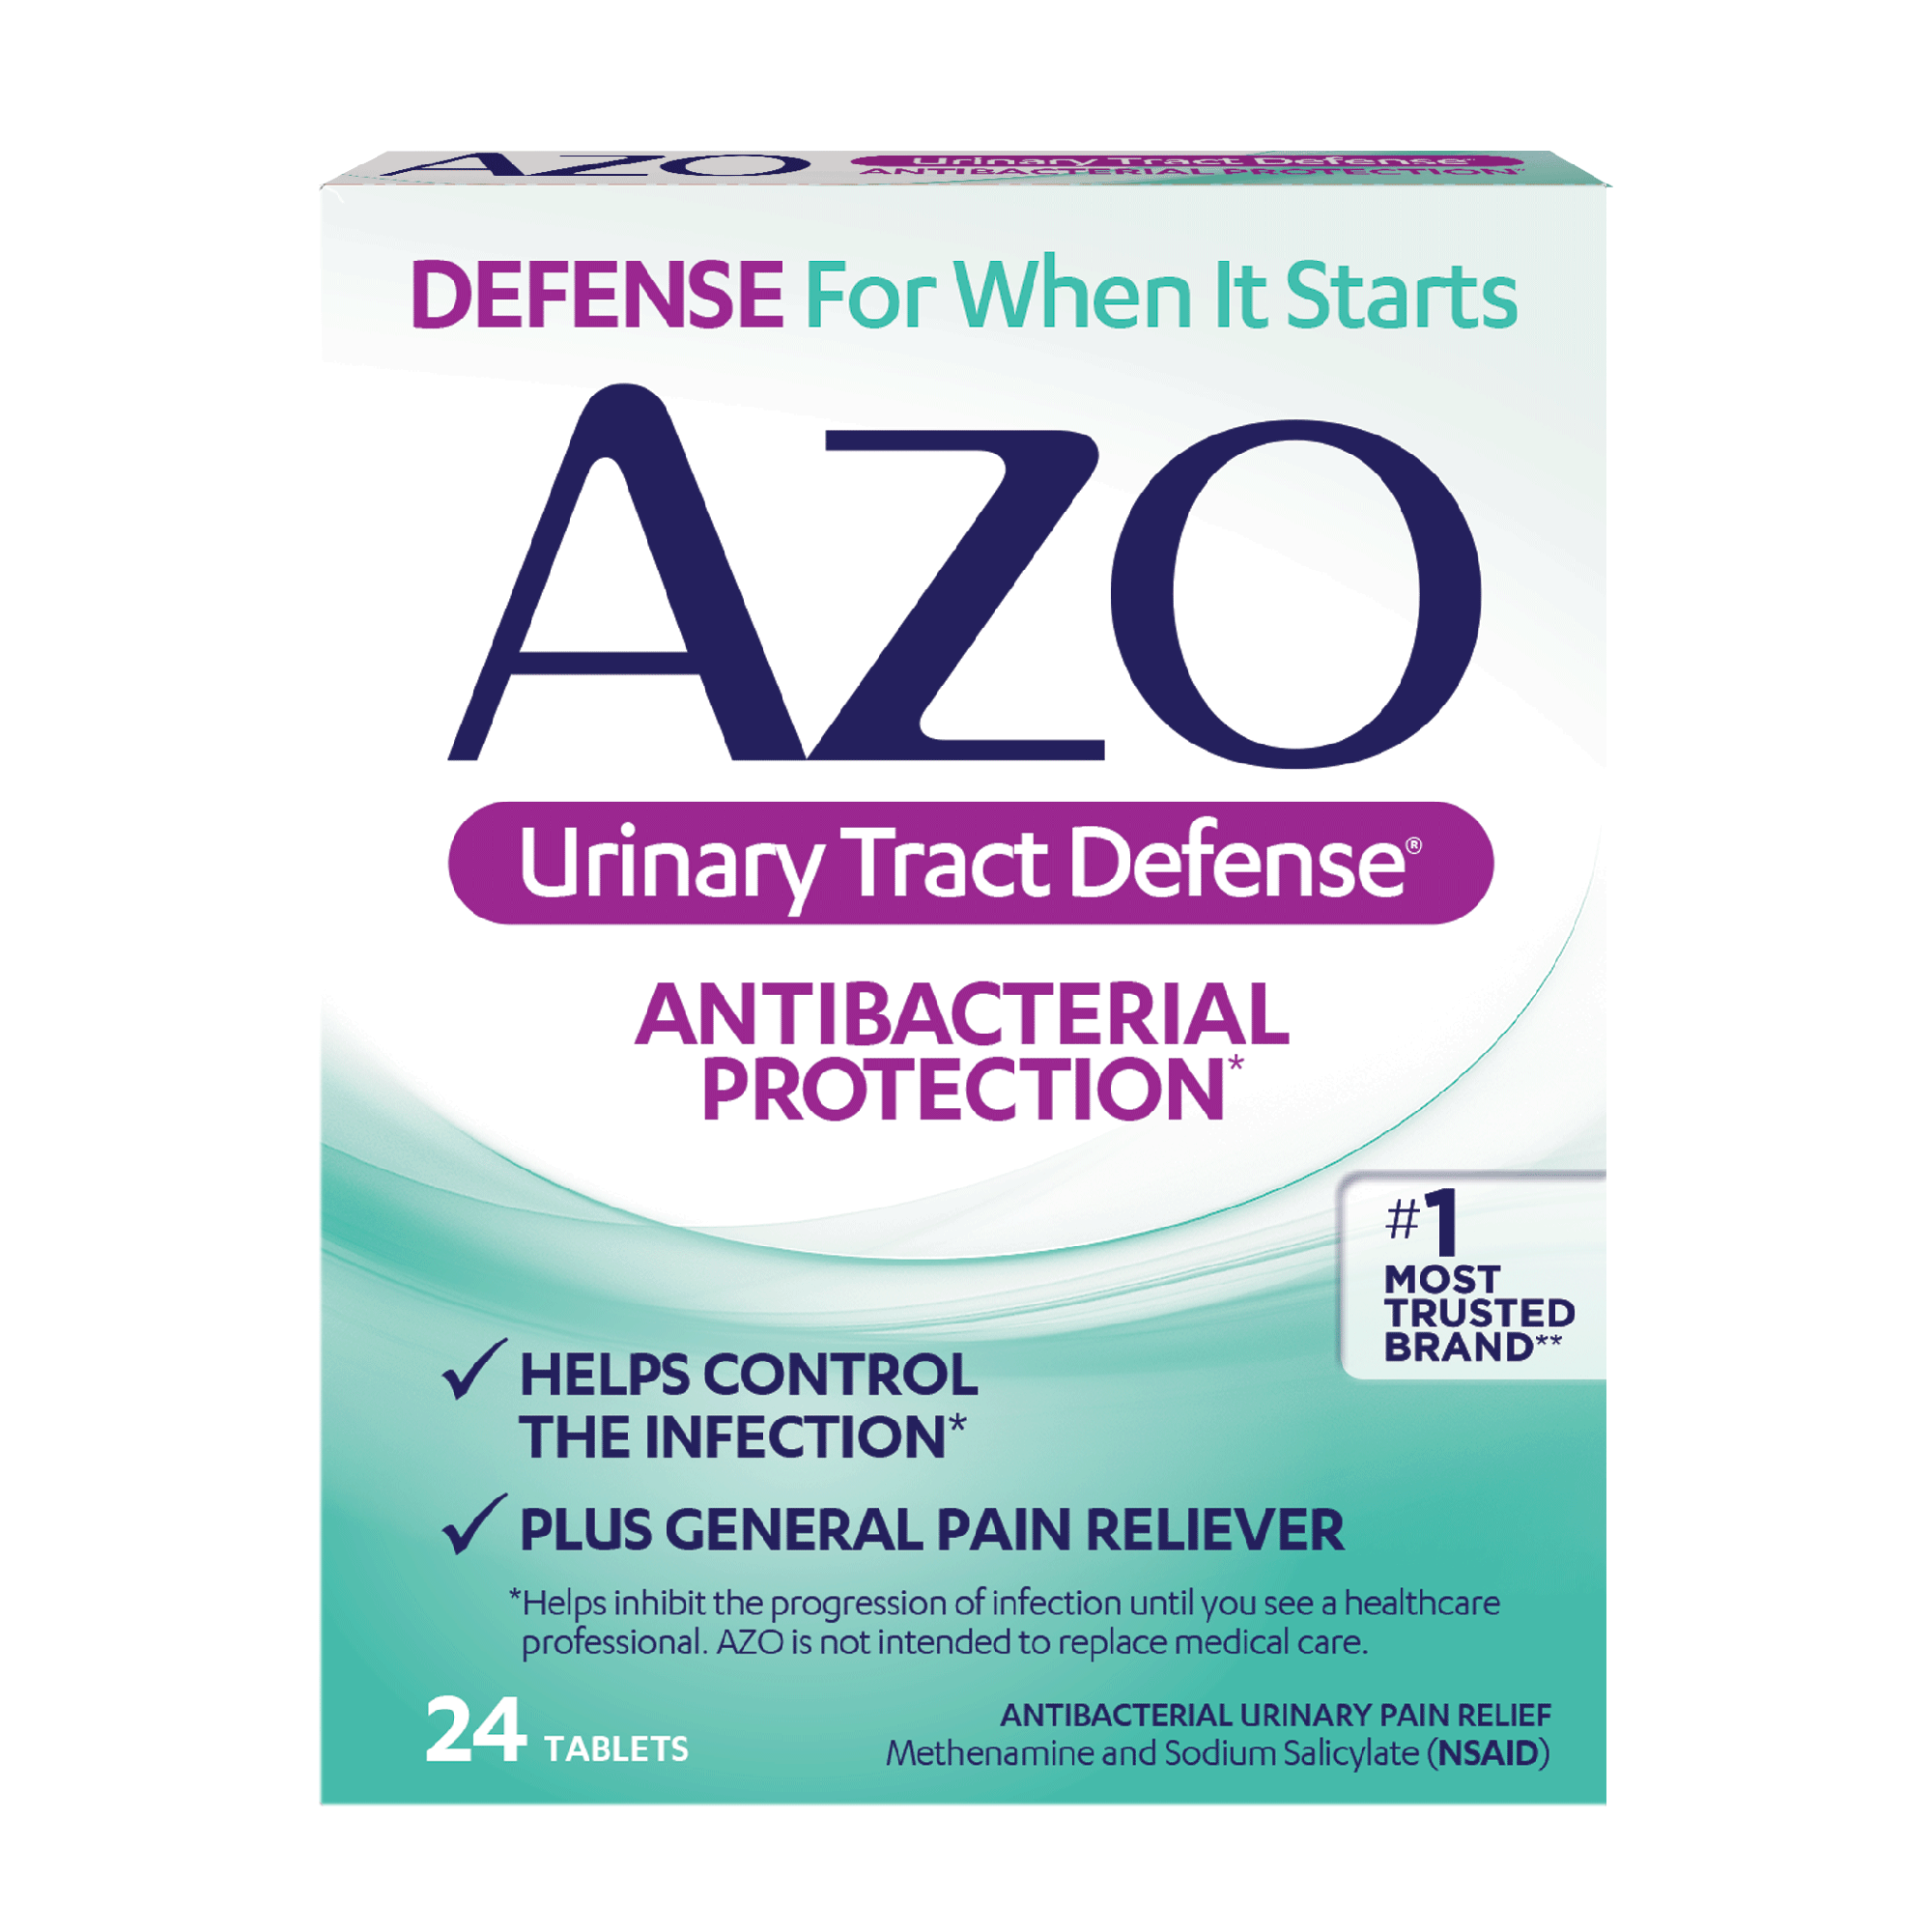 AZO Urinary Tract Defense Antibacterial Protection, 23 oz, 24 Tablets - image 2 of 9